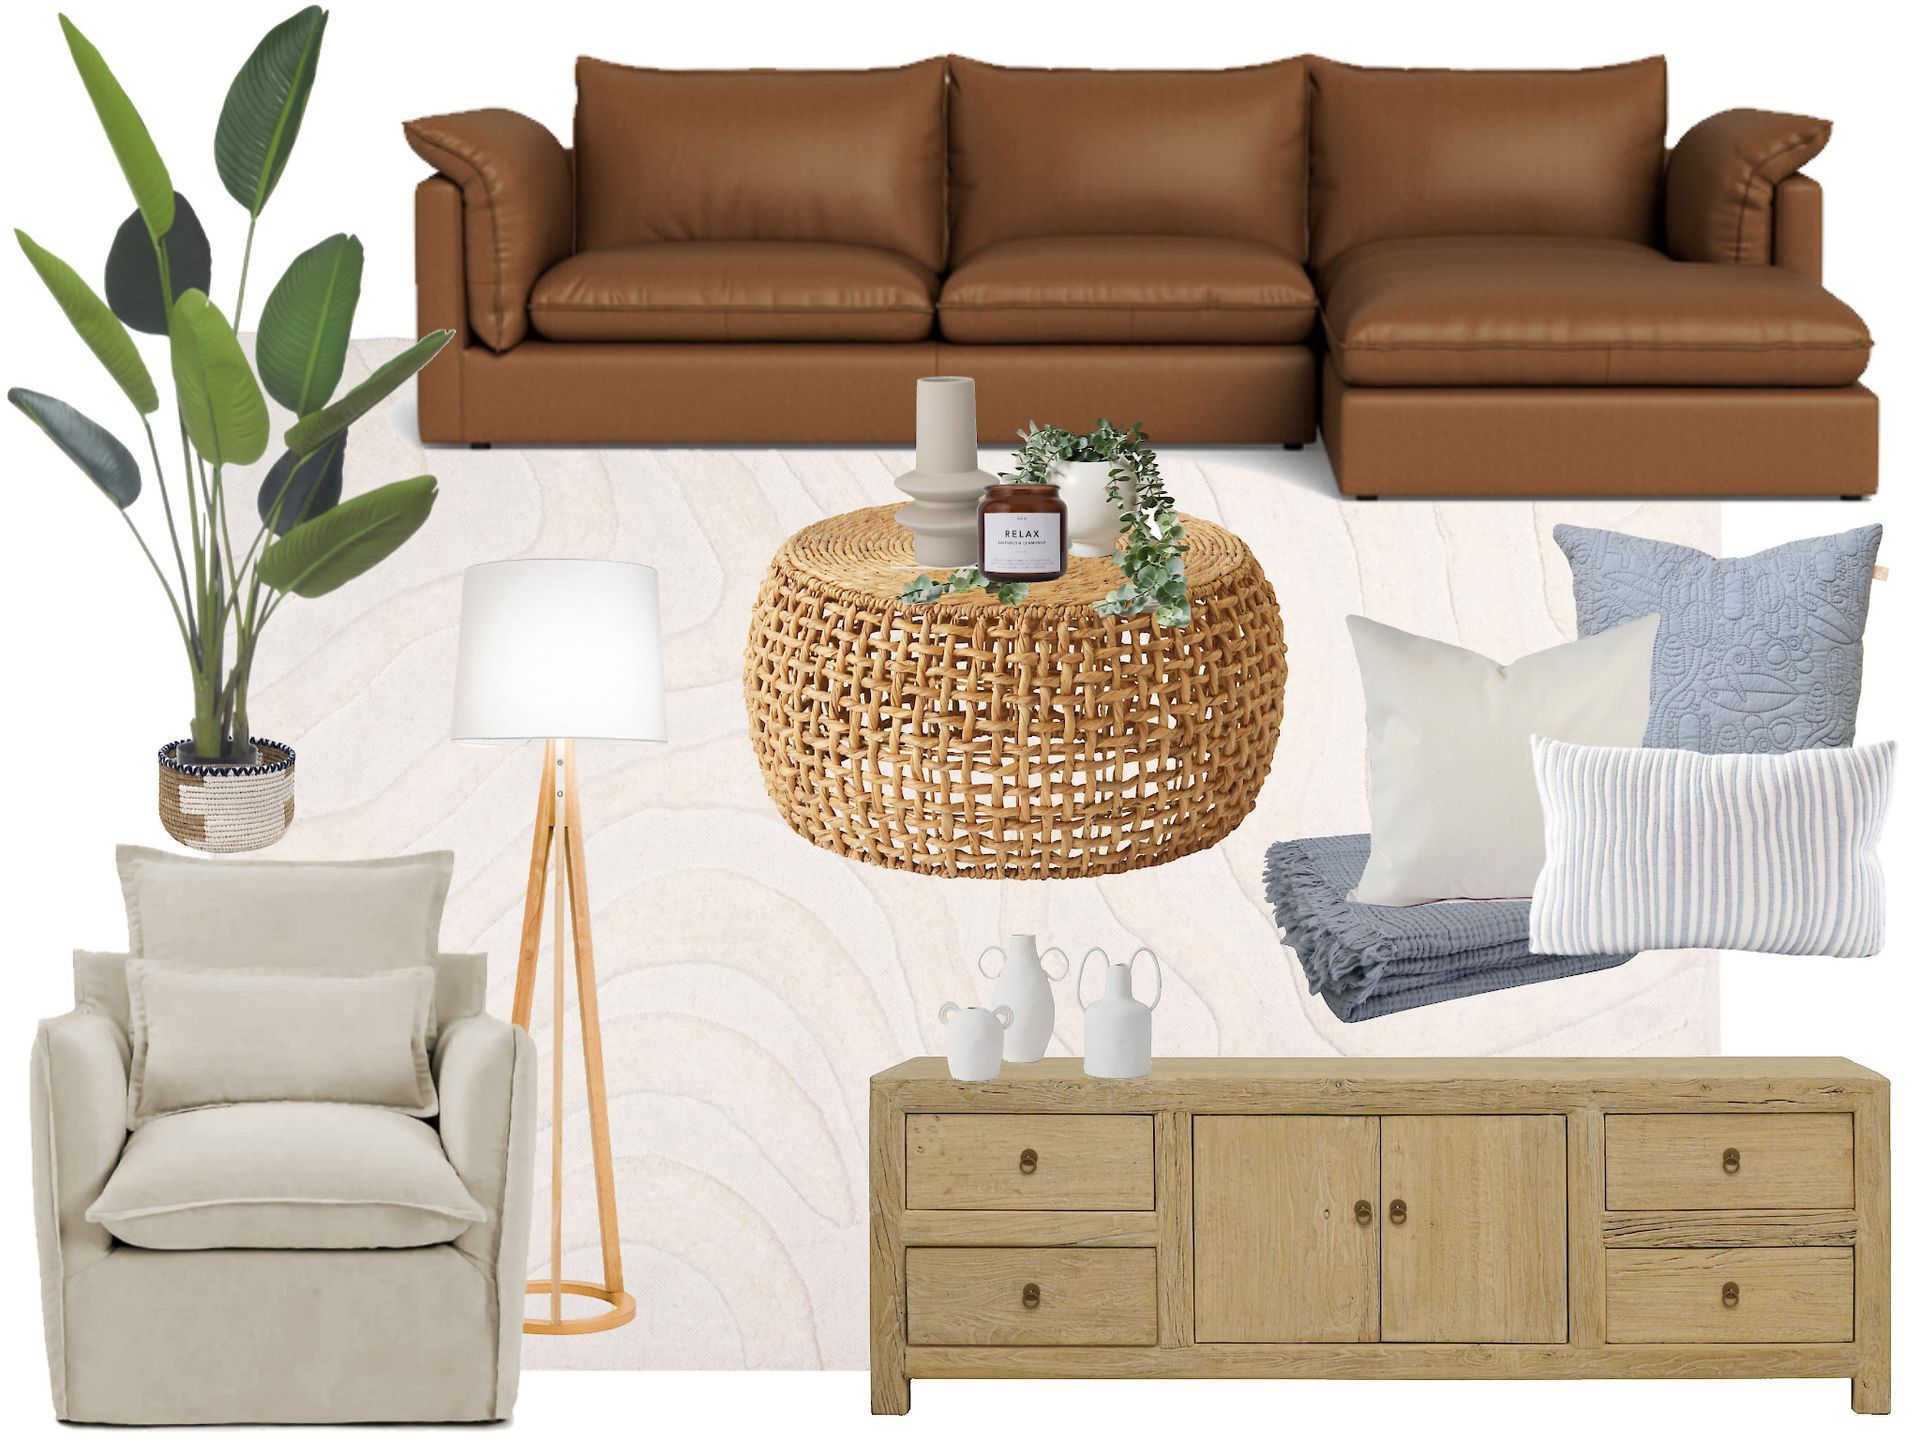 A living room with a brown leather couch , wicker coffee table , chair , and dresser.